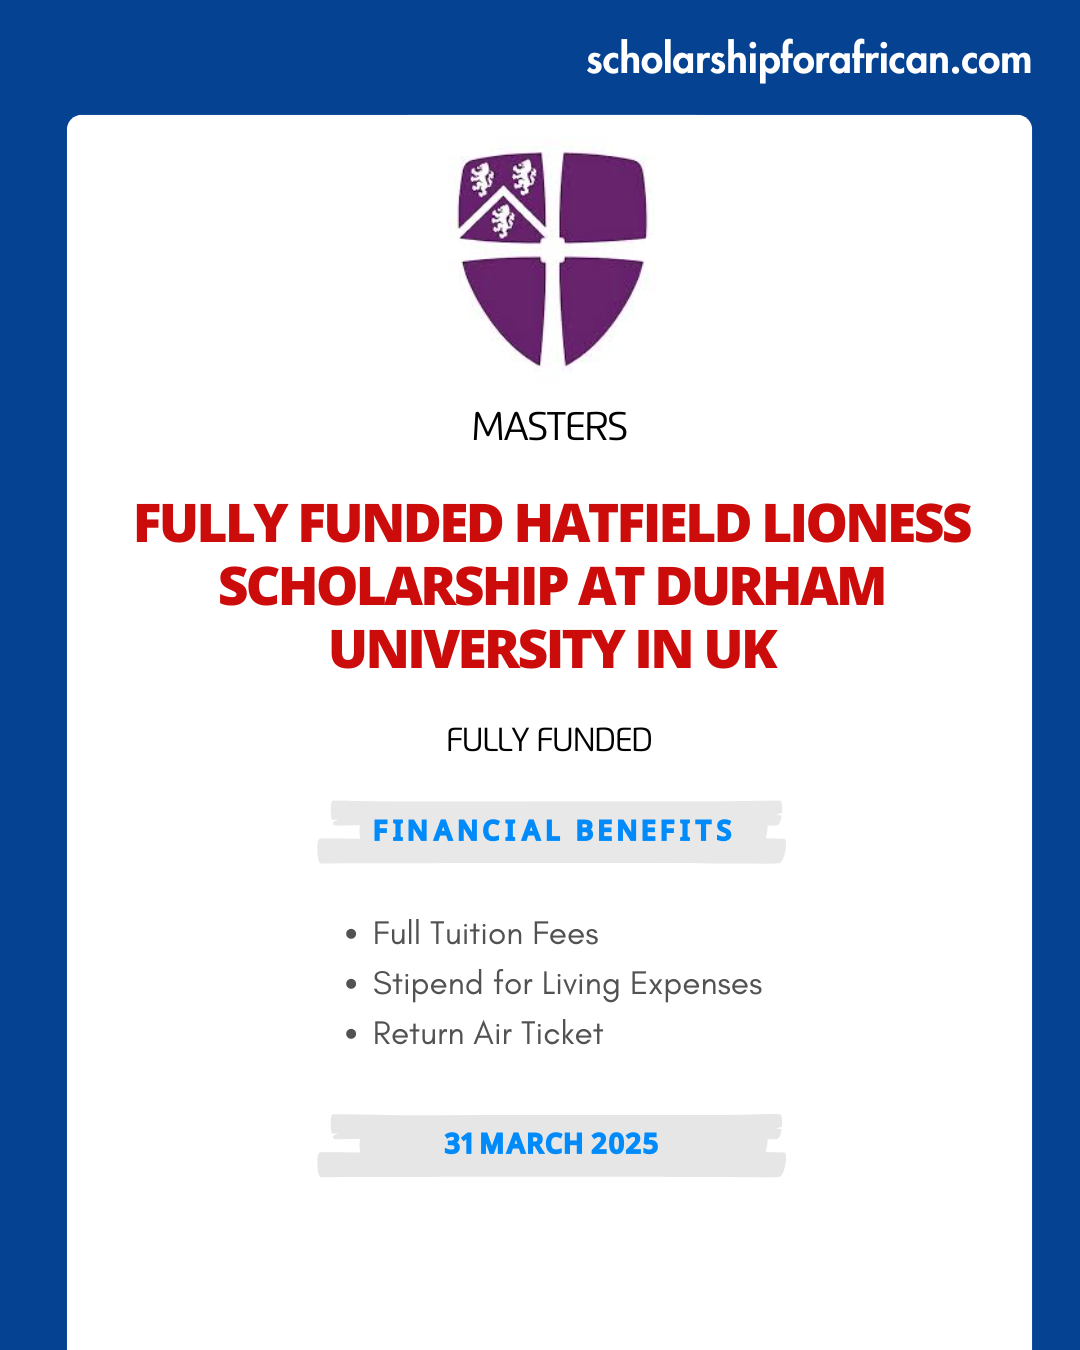 Fully Funded Hatfield Lioness Scholarship at Durham University in UK